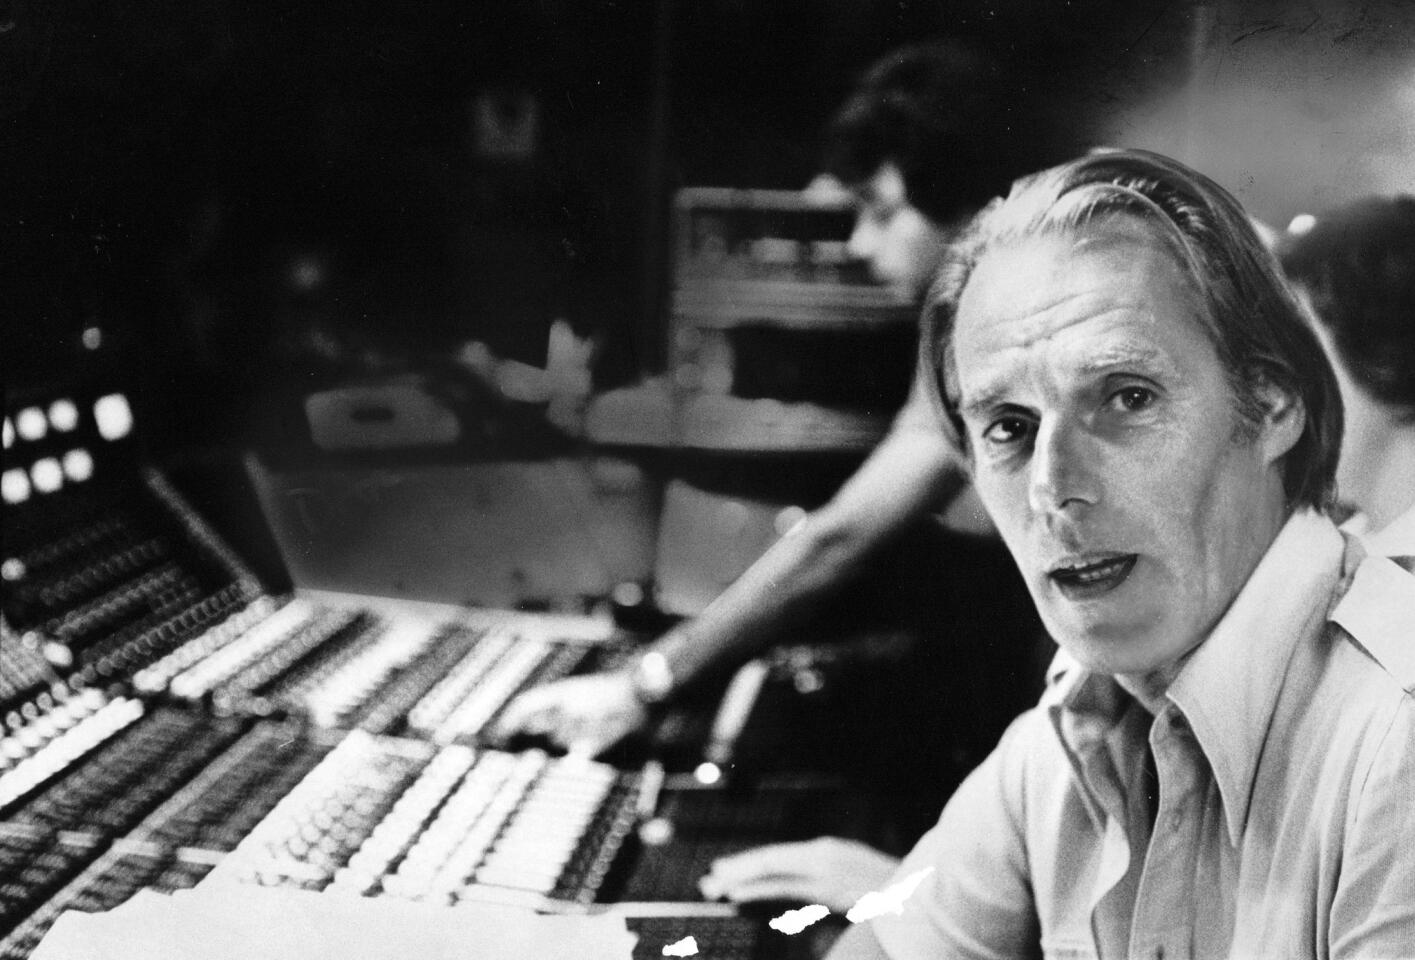 George Martin in 1977. He began working with the Beatles in 1962 after they were signed to Parlophone Records. He would go on to produce most of their recordings until their breakup in 1970.